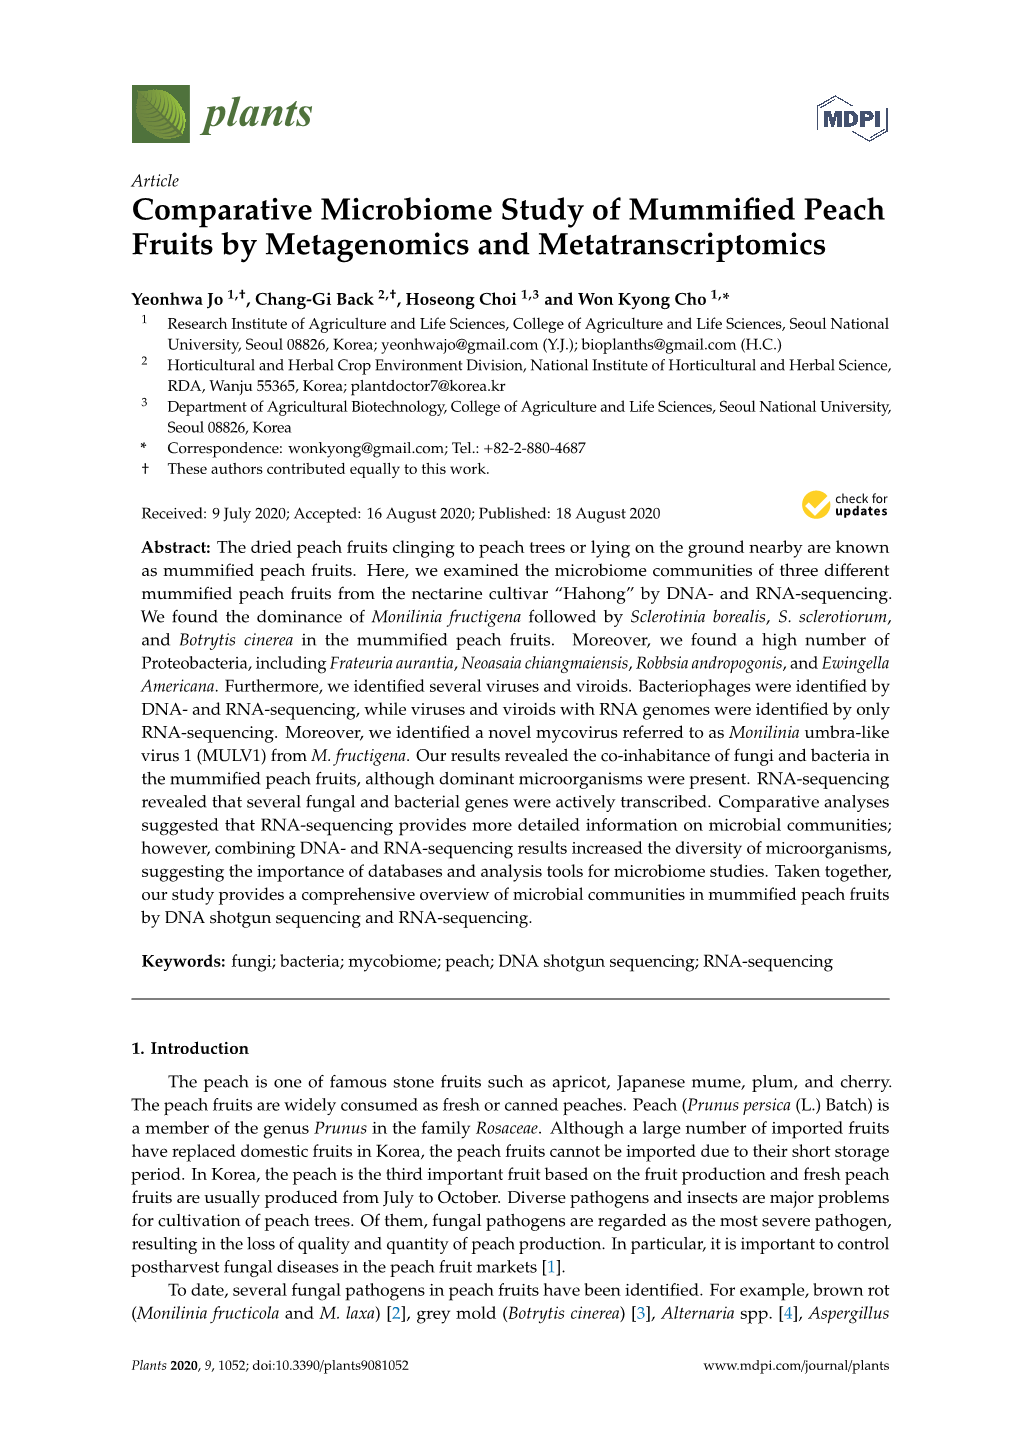 Comparative Microbiome Study of Mummified Peach Fruits By